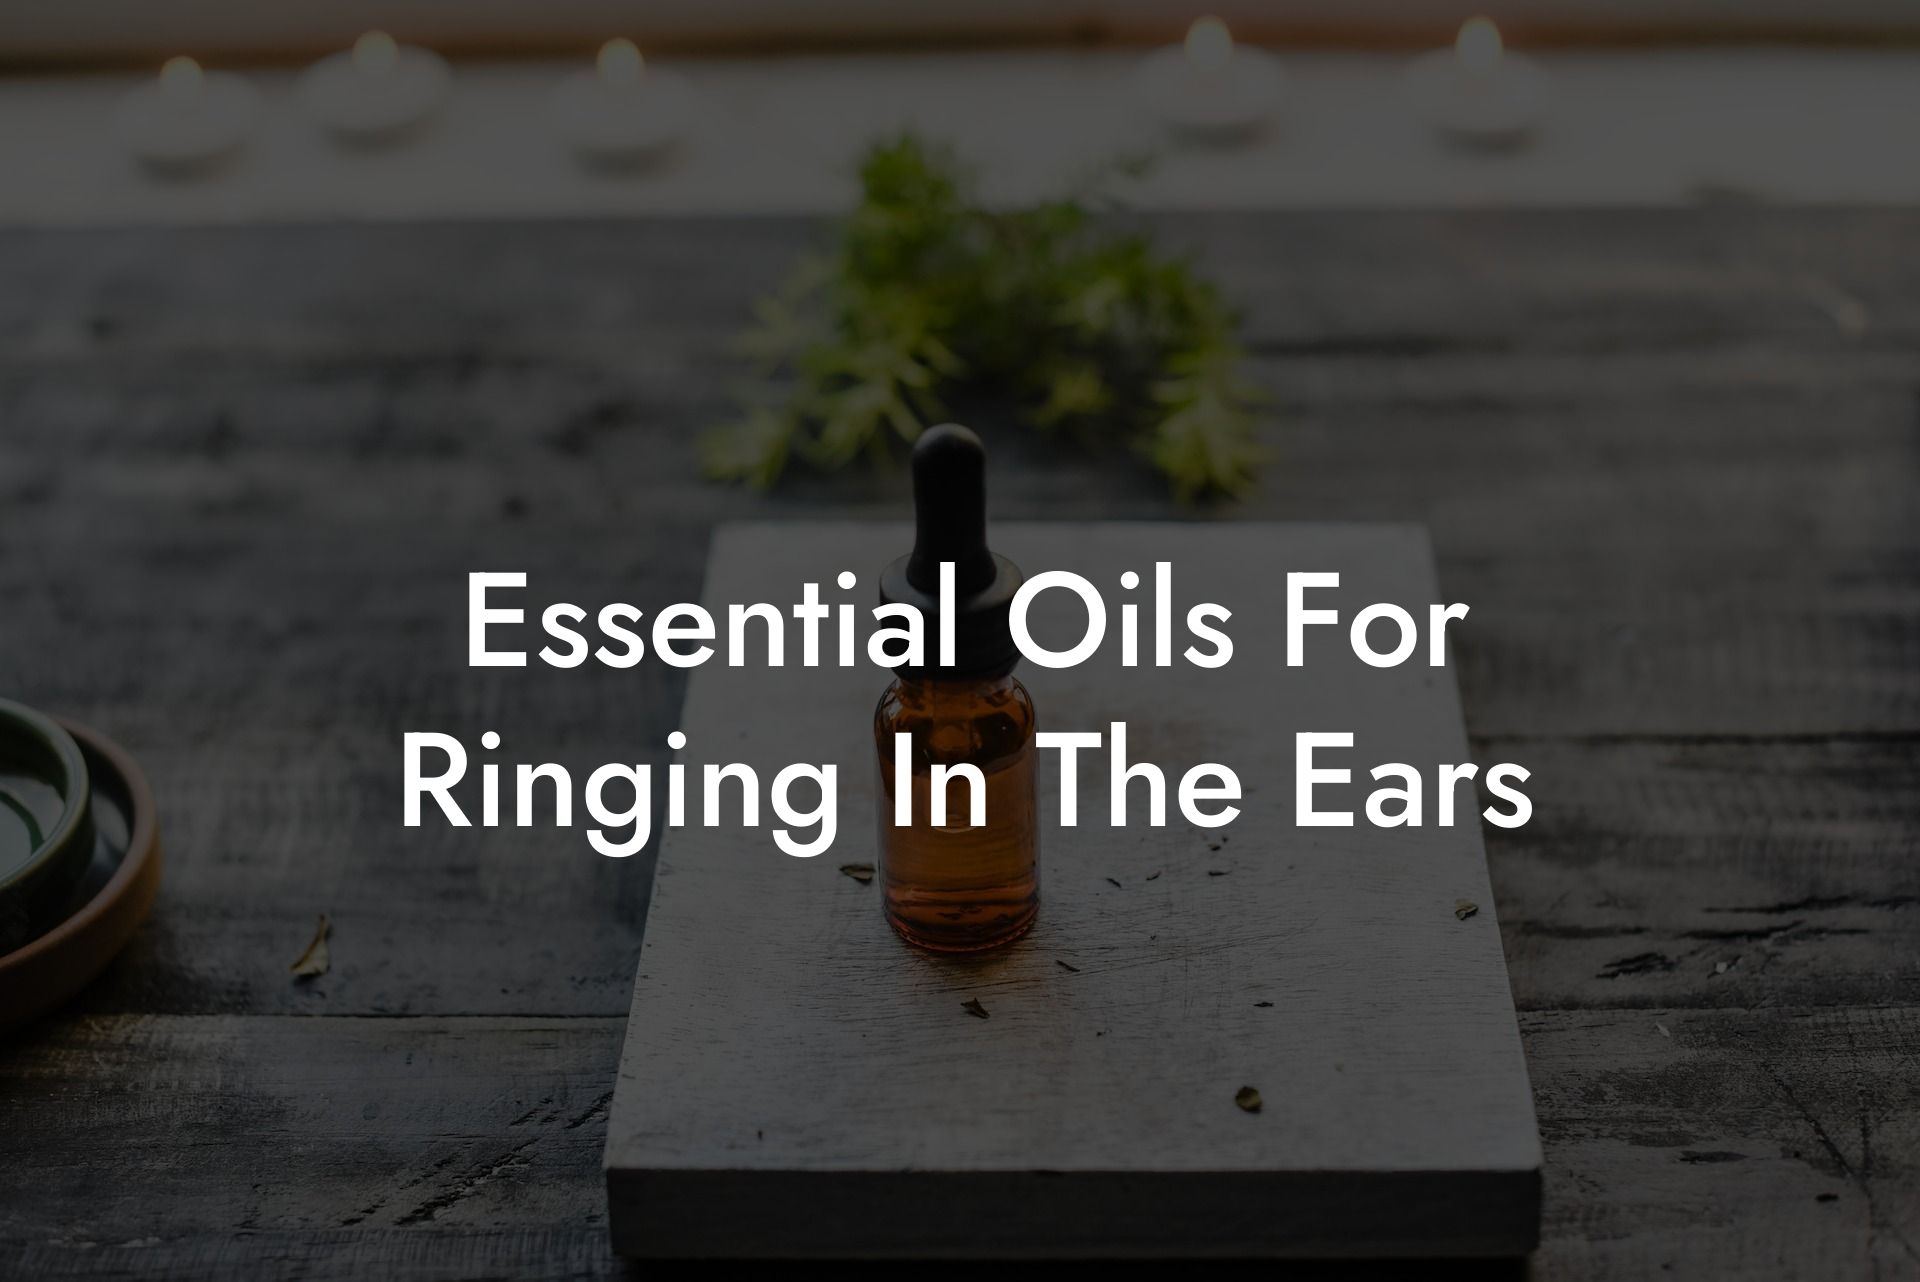 Essential Oils For Ringing In The Ears